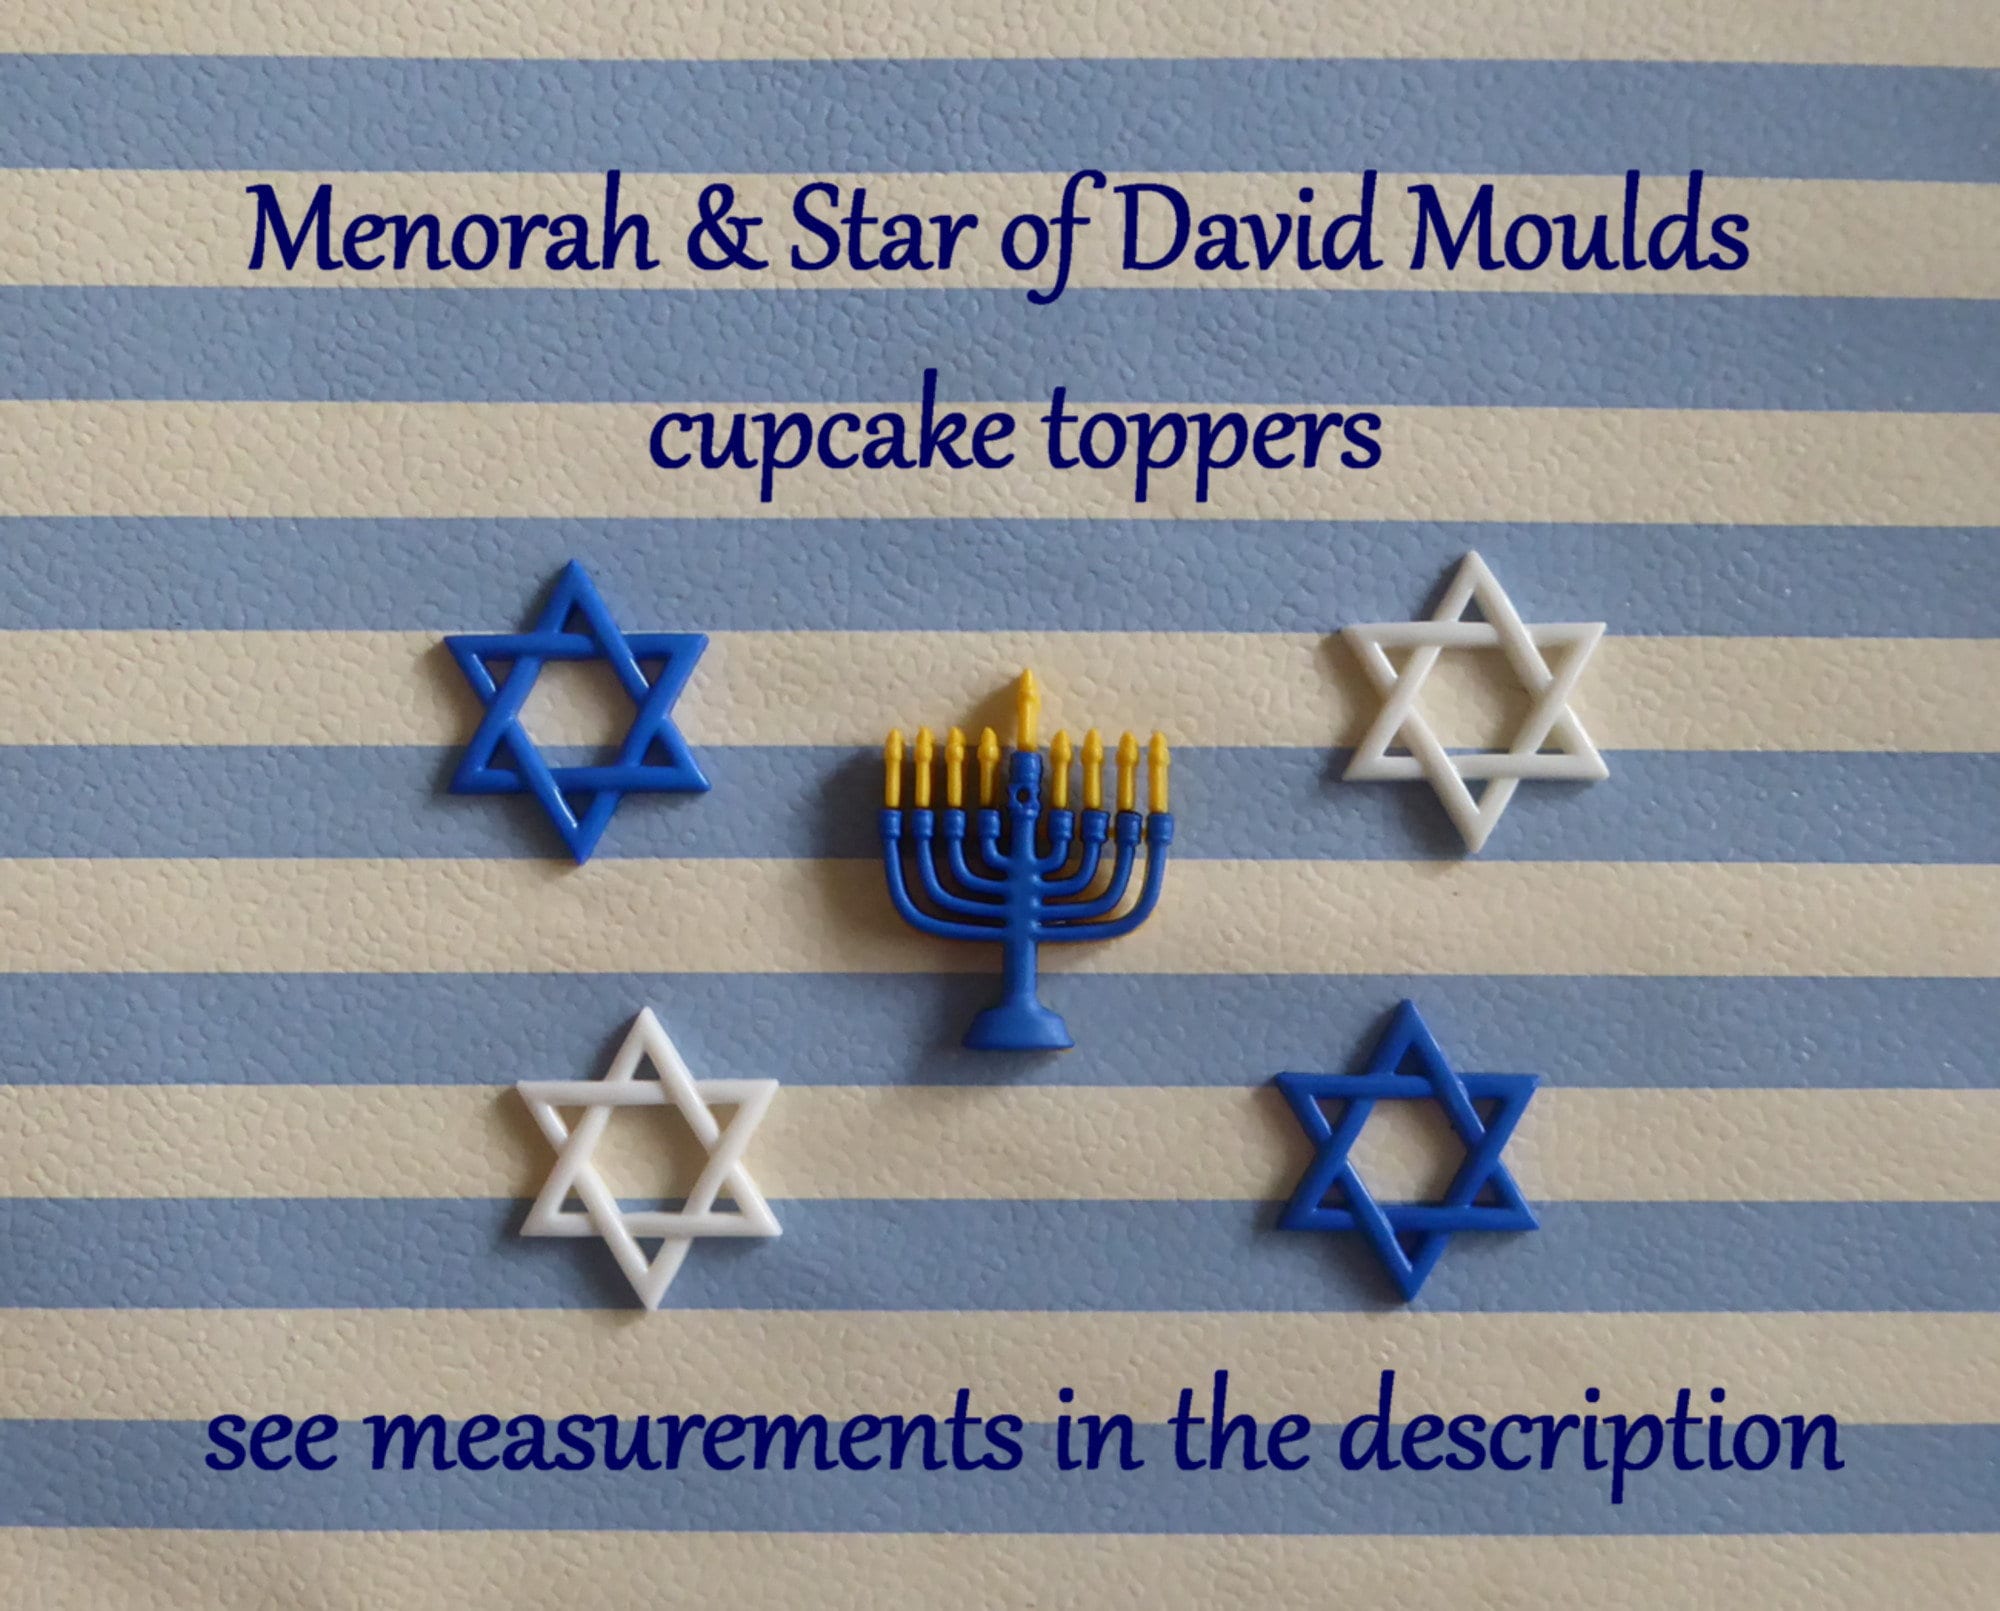 Hanukkah Silicone Ice Cube Mold Tray, Dreidel and Menorah Molds, Fun Cooking and Baking Holiday (2-Pack)